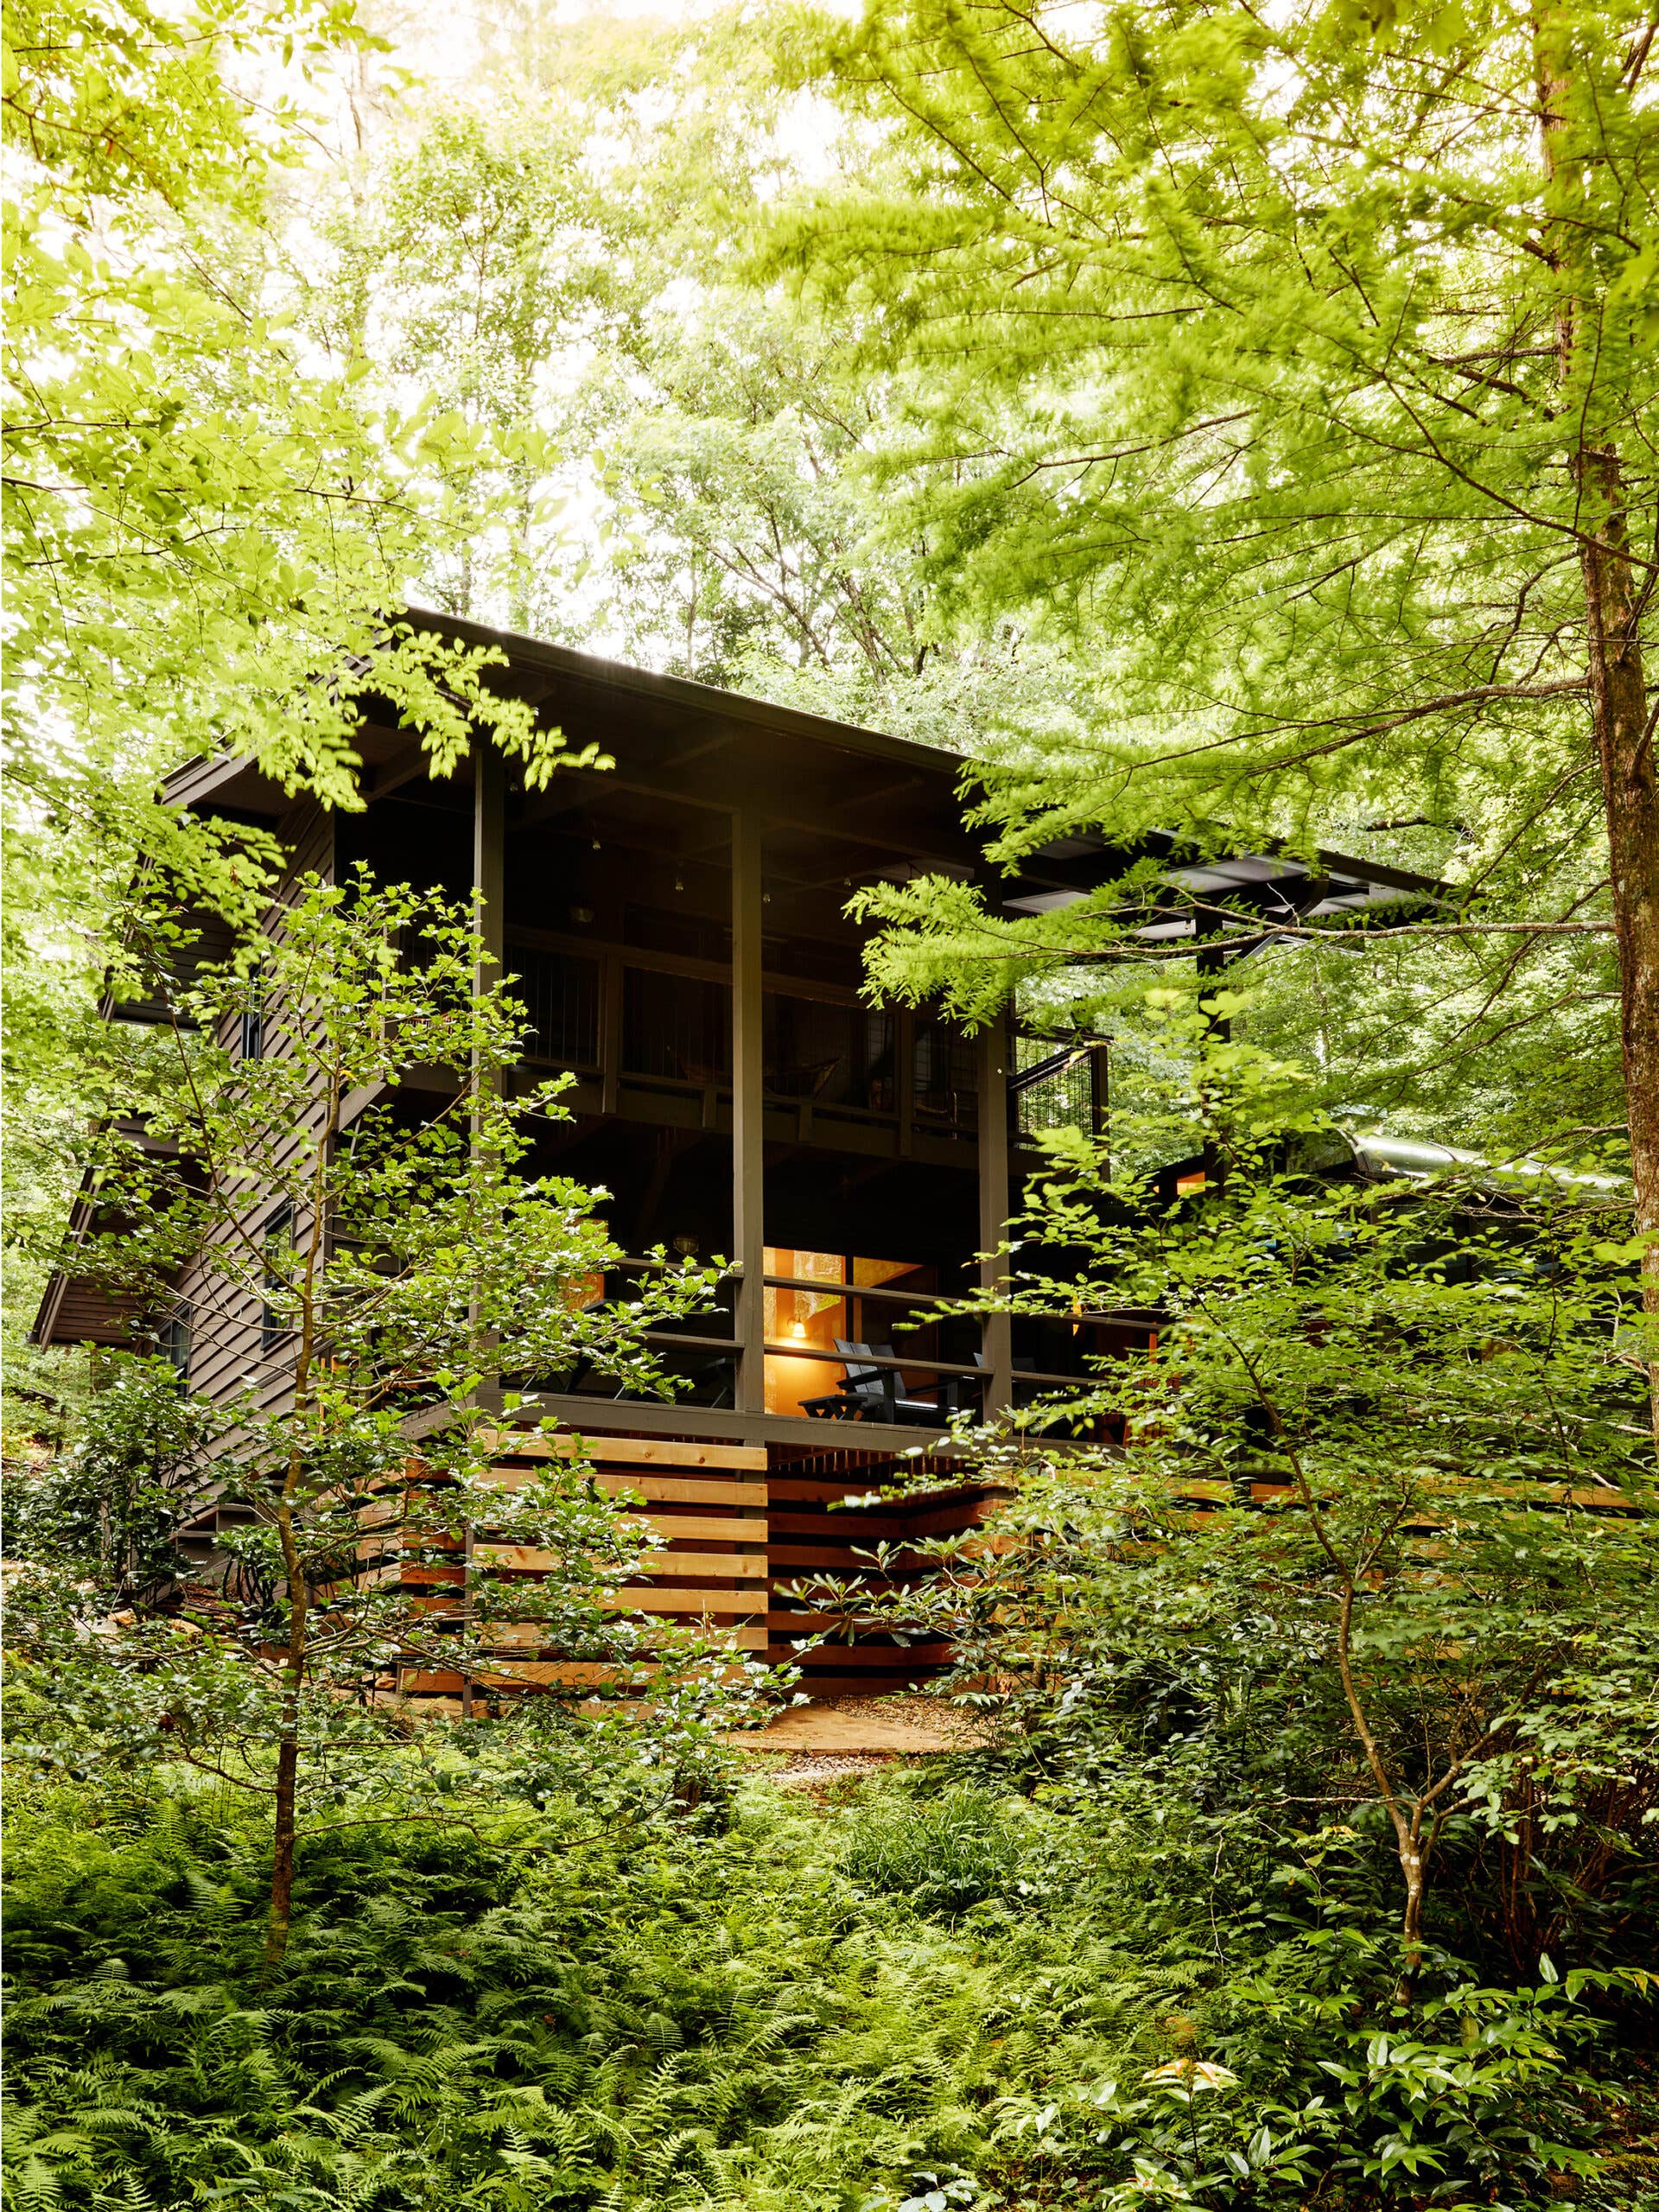 Black painted home and wooden front porch surrounded by green, leafy trees in the woods